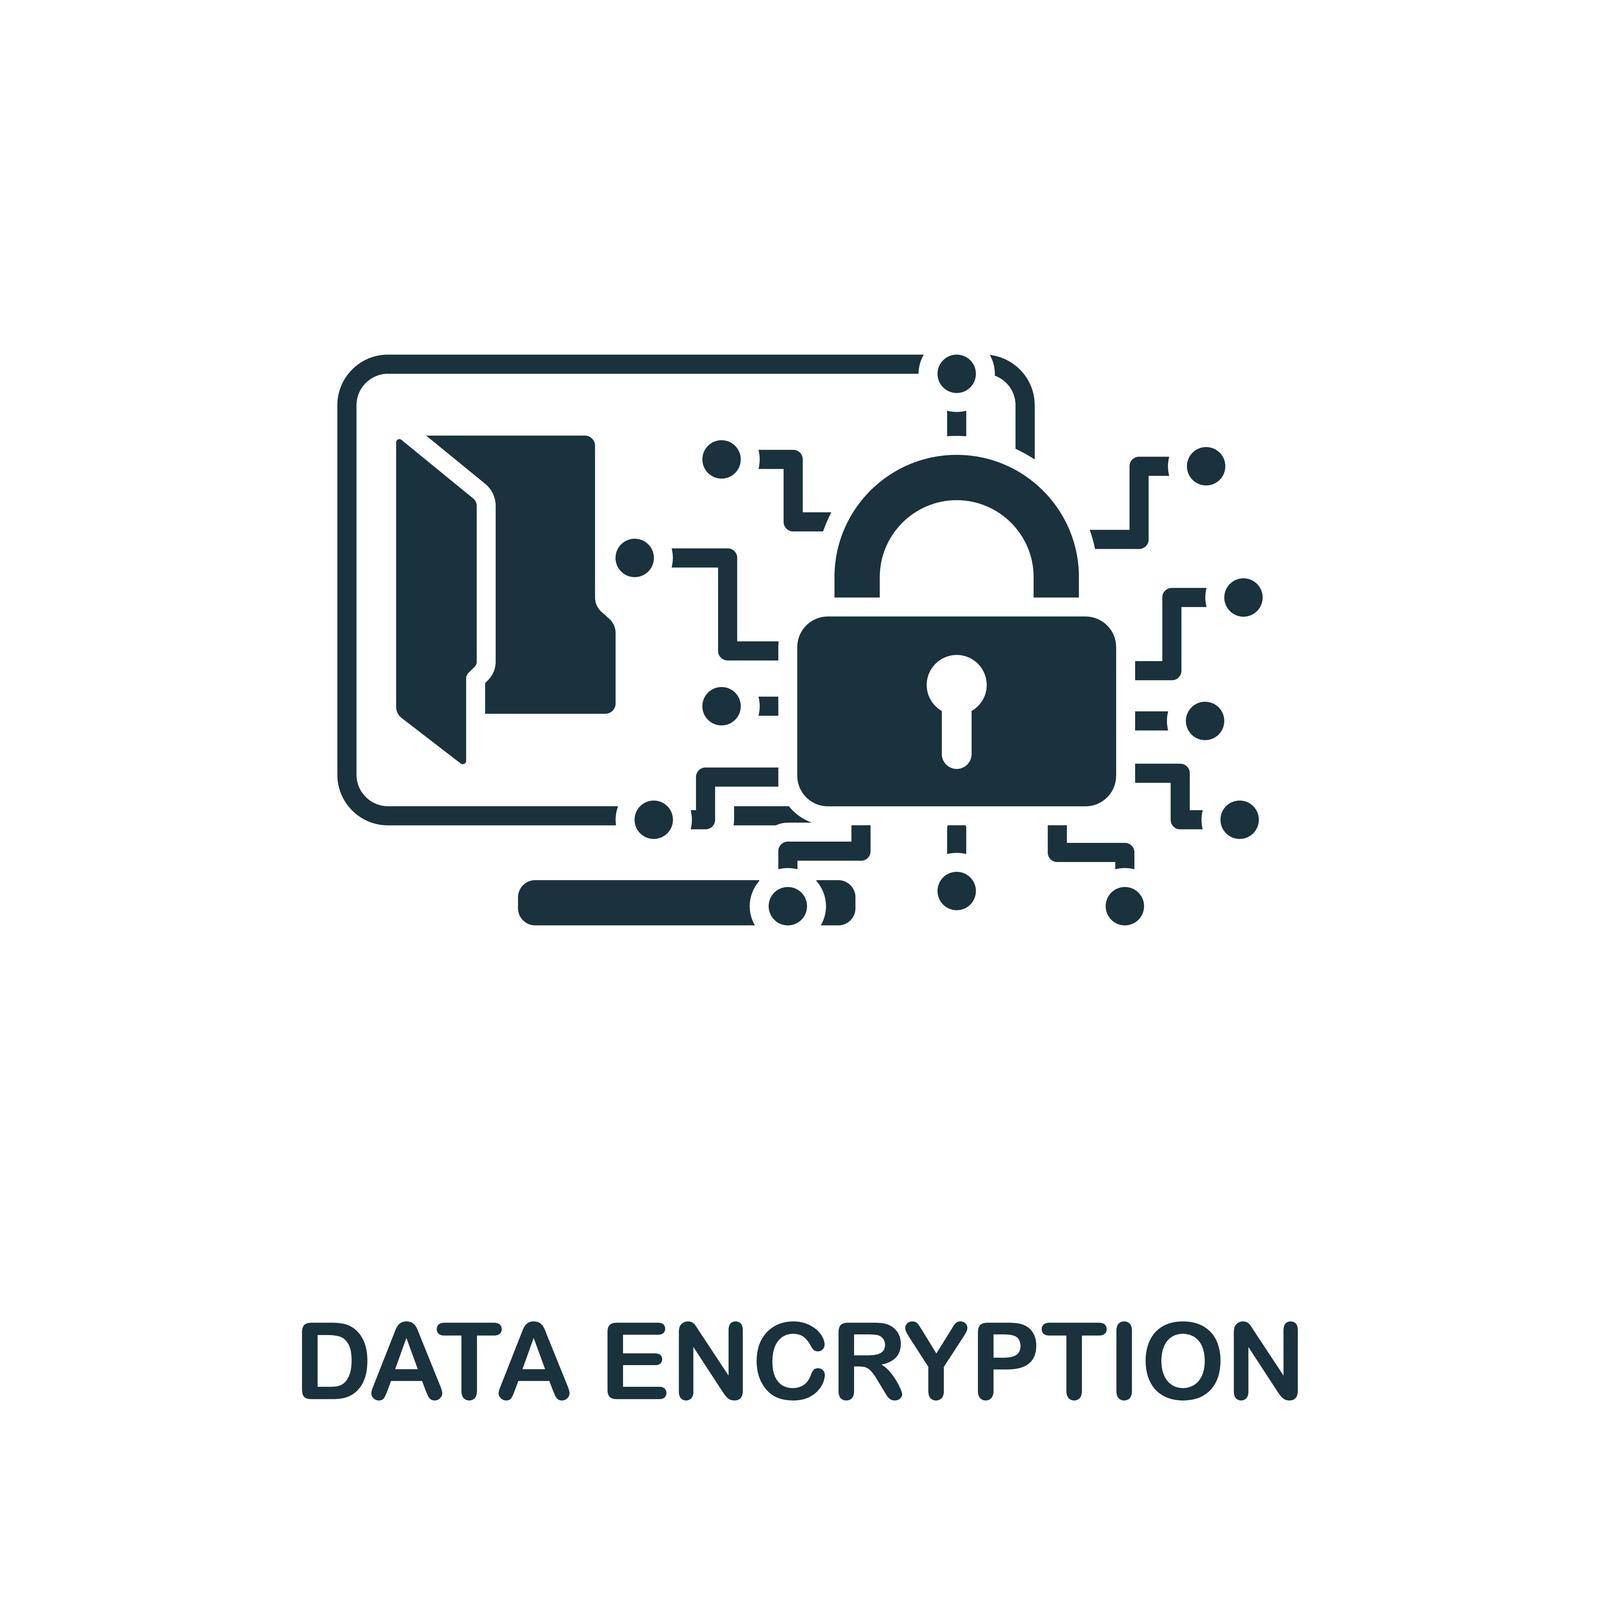 Data Encryption icon. Monochrome simple Cybercrime icon for templates, web design and infographics by simakovavector